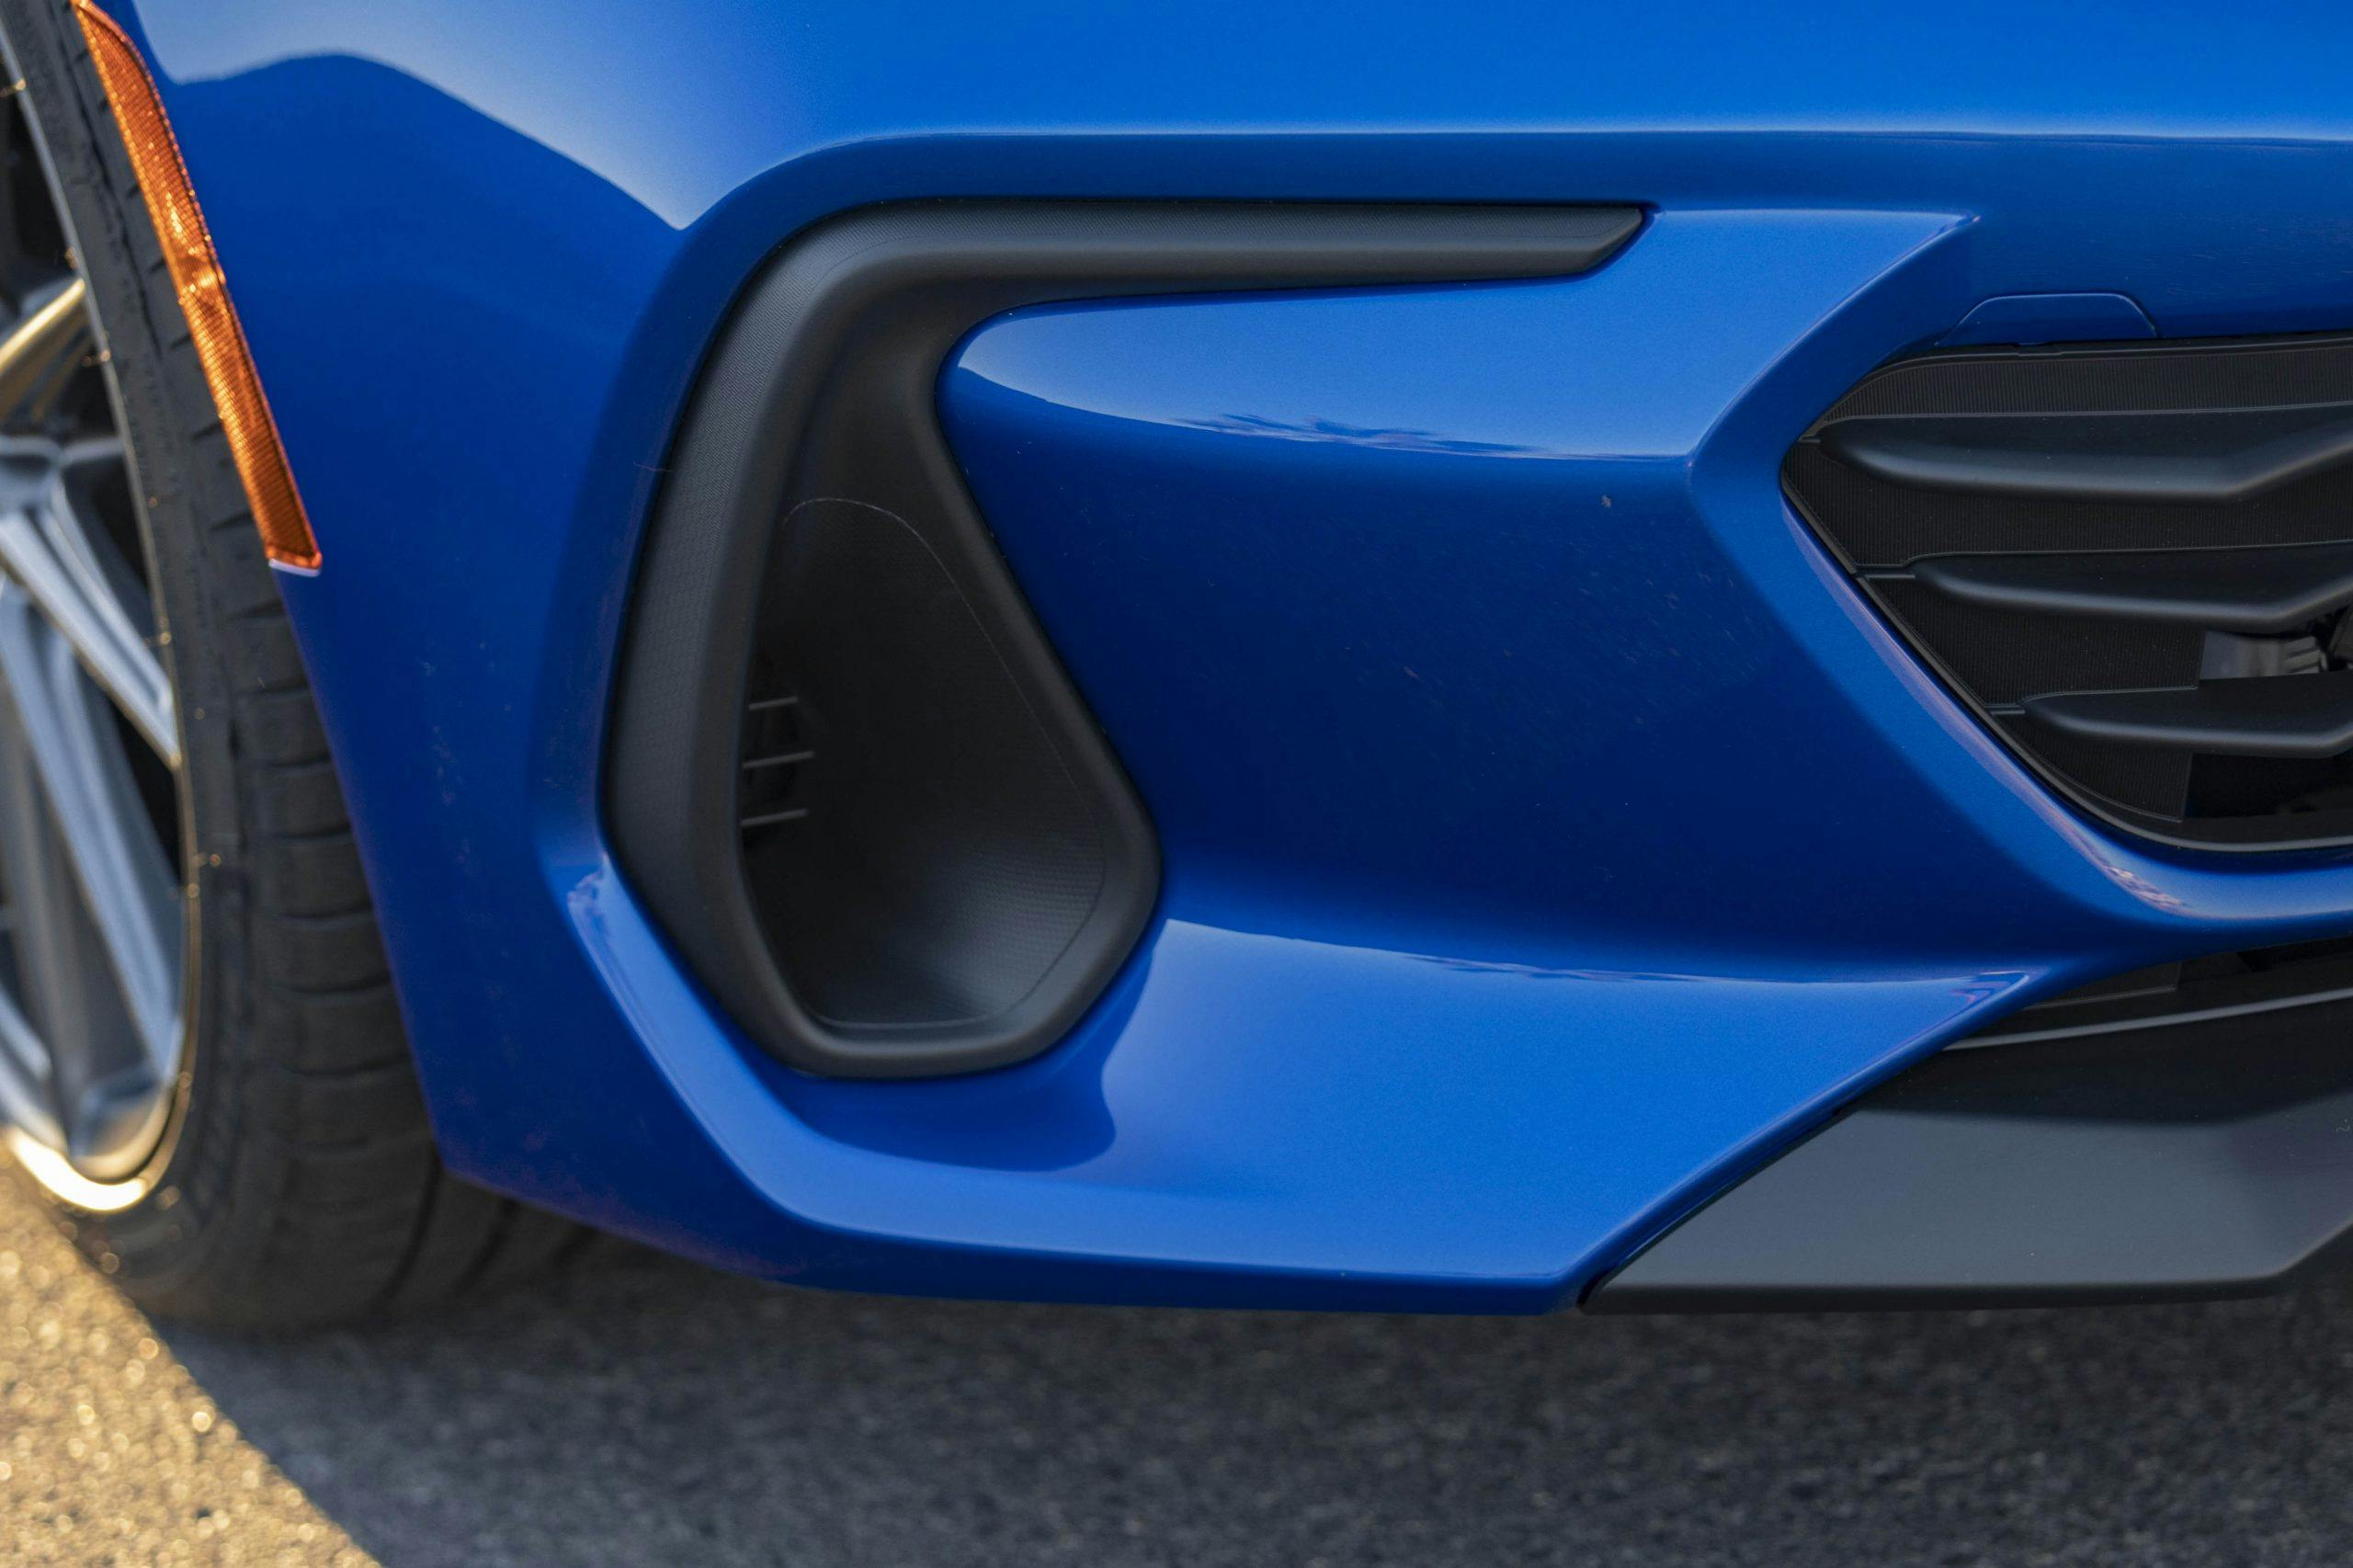 New 2022 Subaru BRZ front lower air duct detail